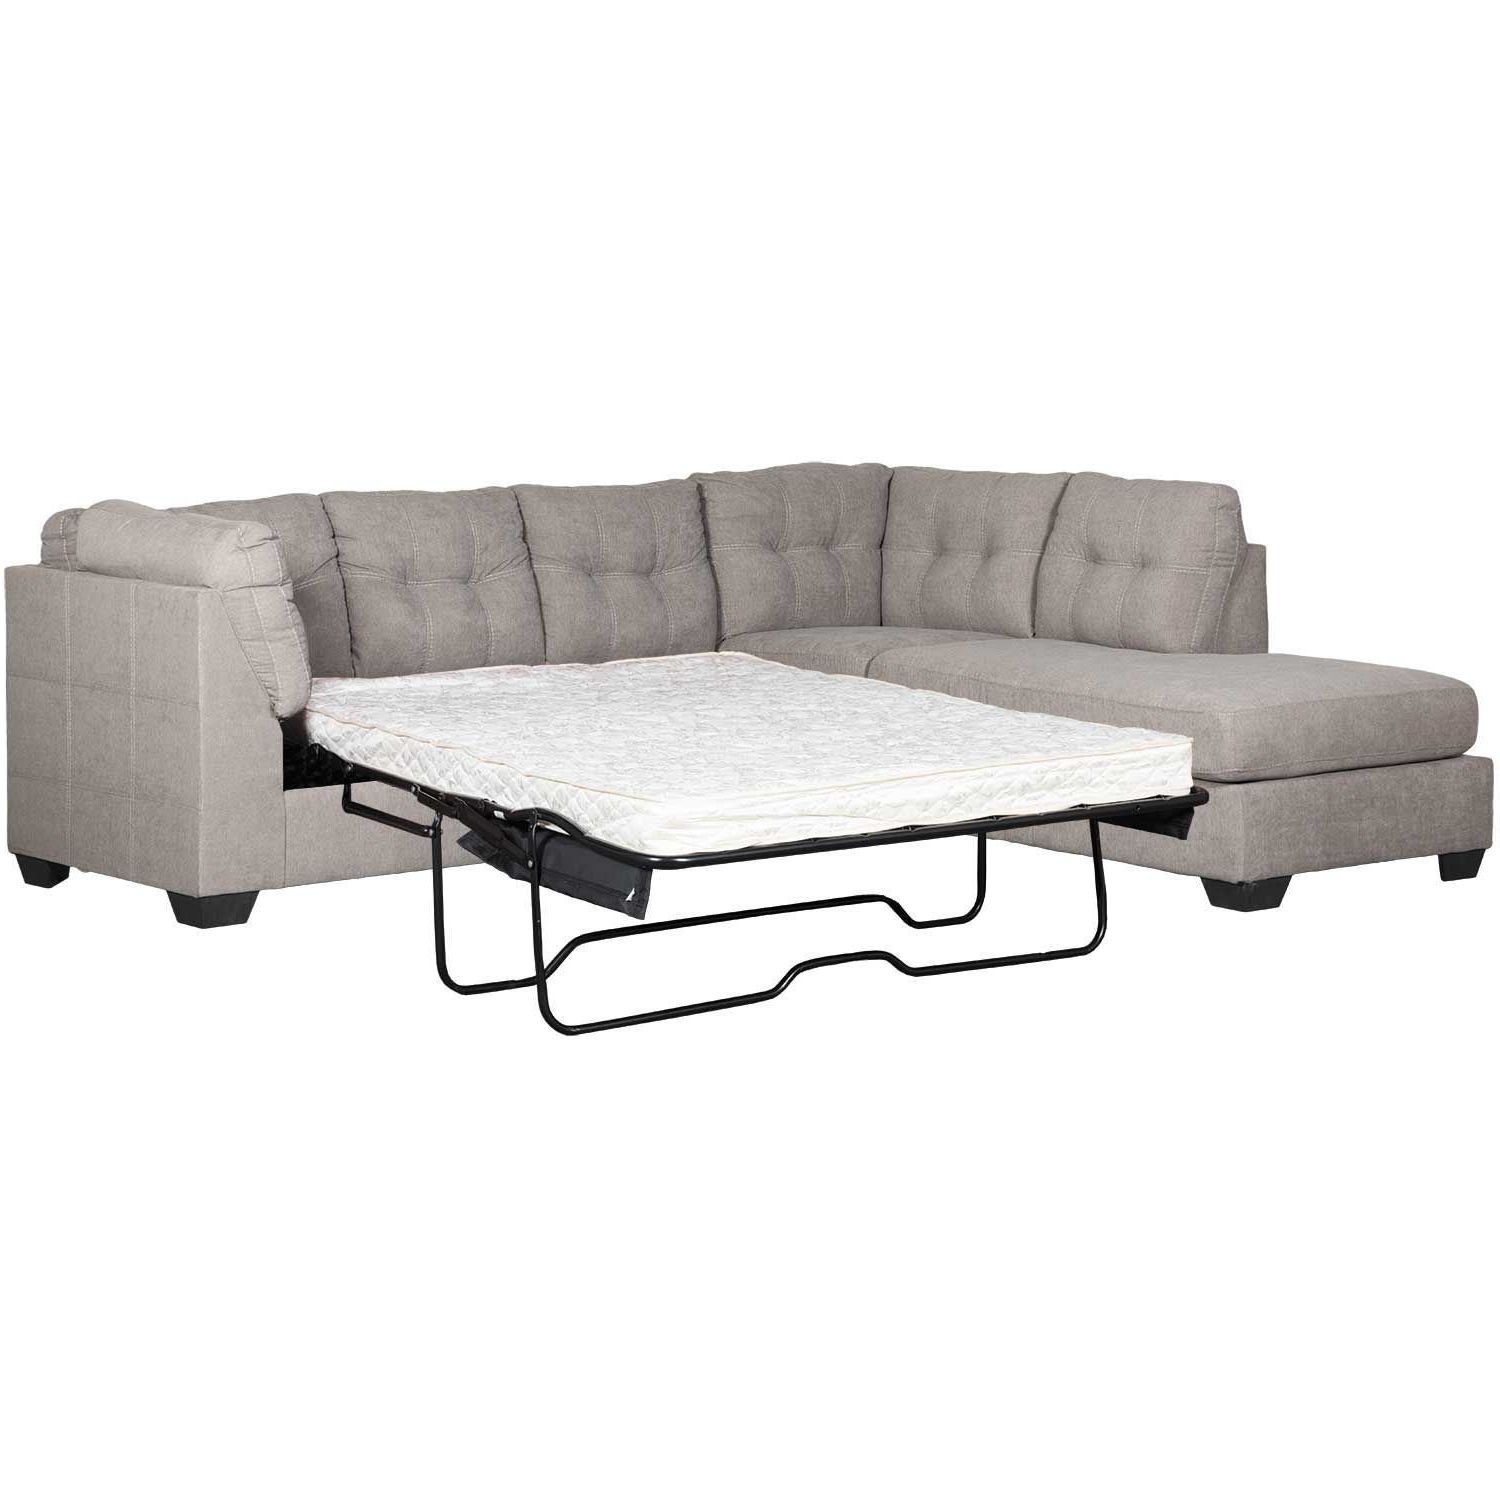 Aspen 2 Piece Sleeper Sectionals With Laf Chaise In Well Known Sleeper Sectional (View 19 of 20)